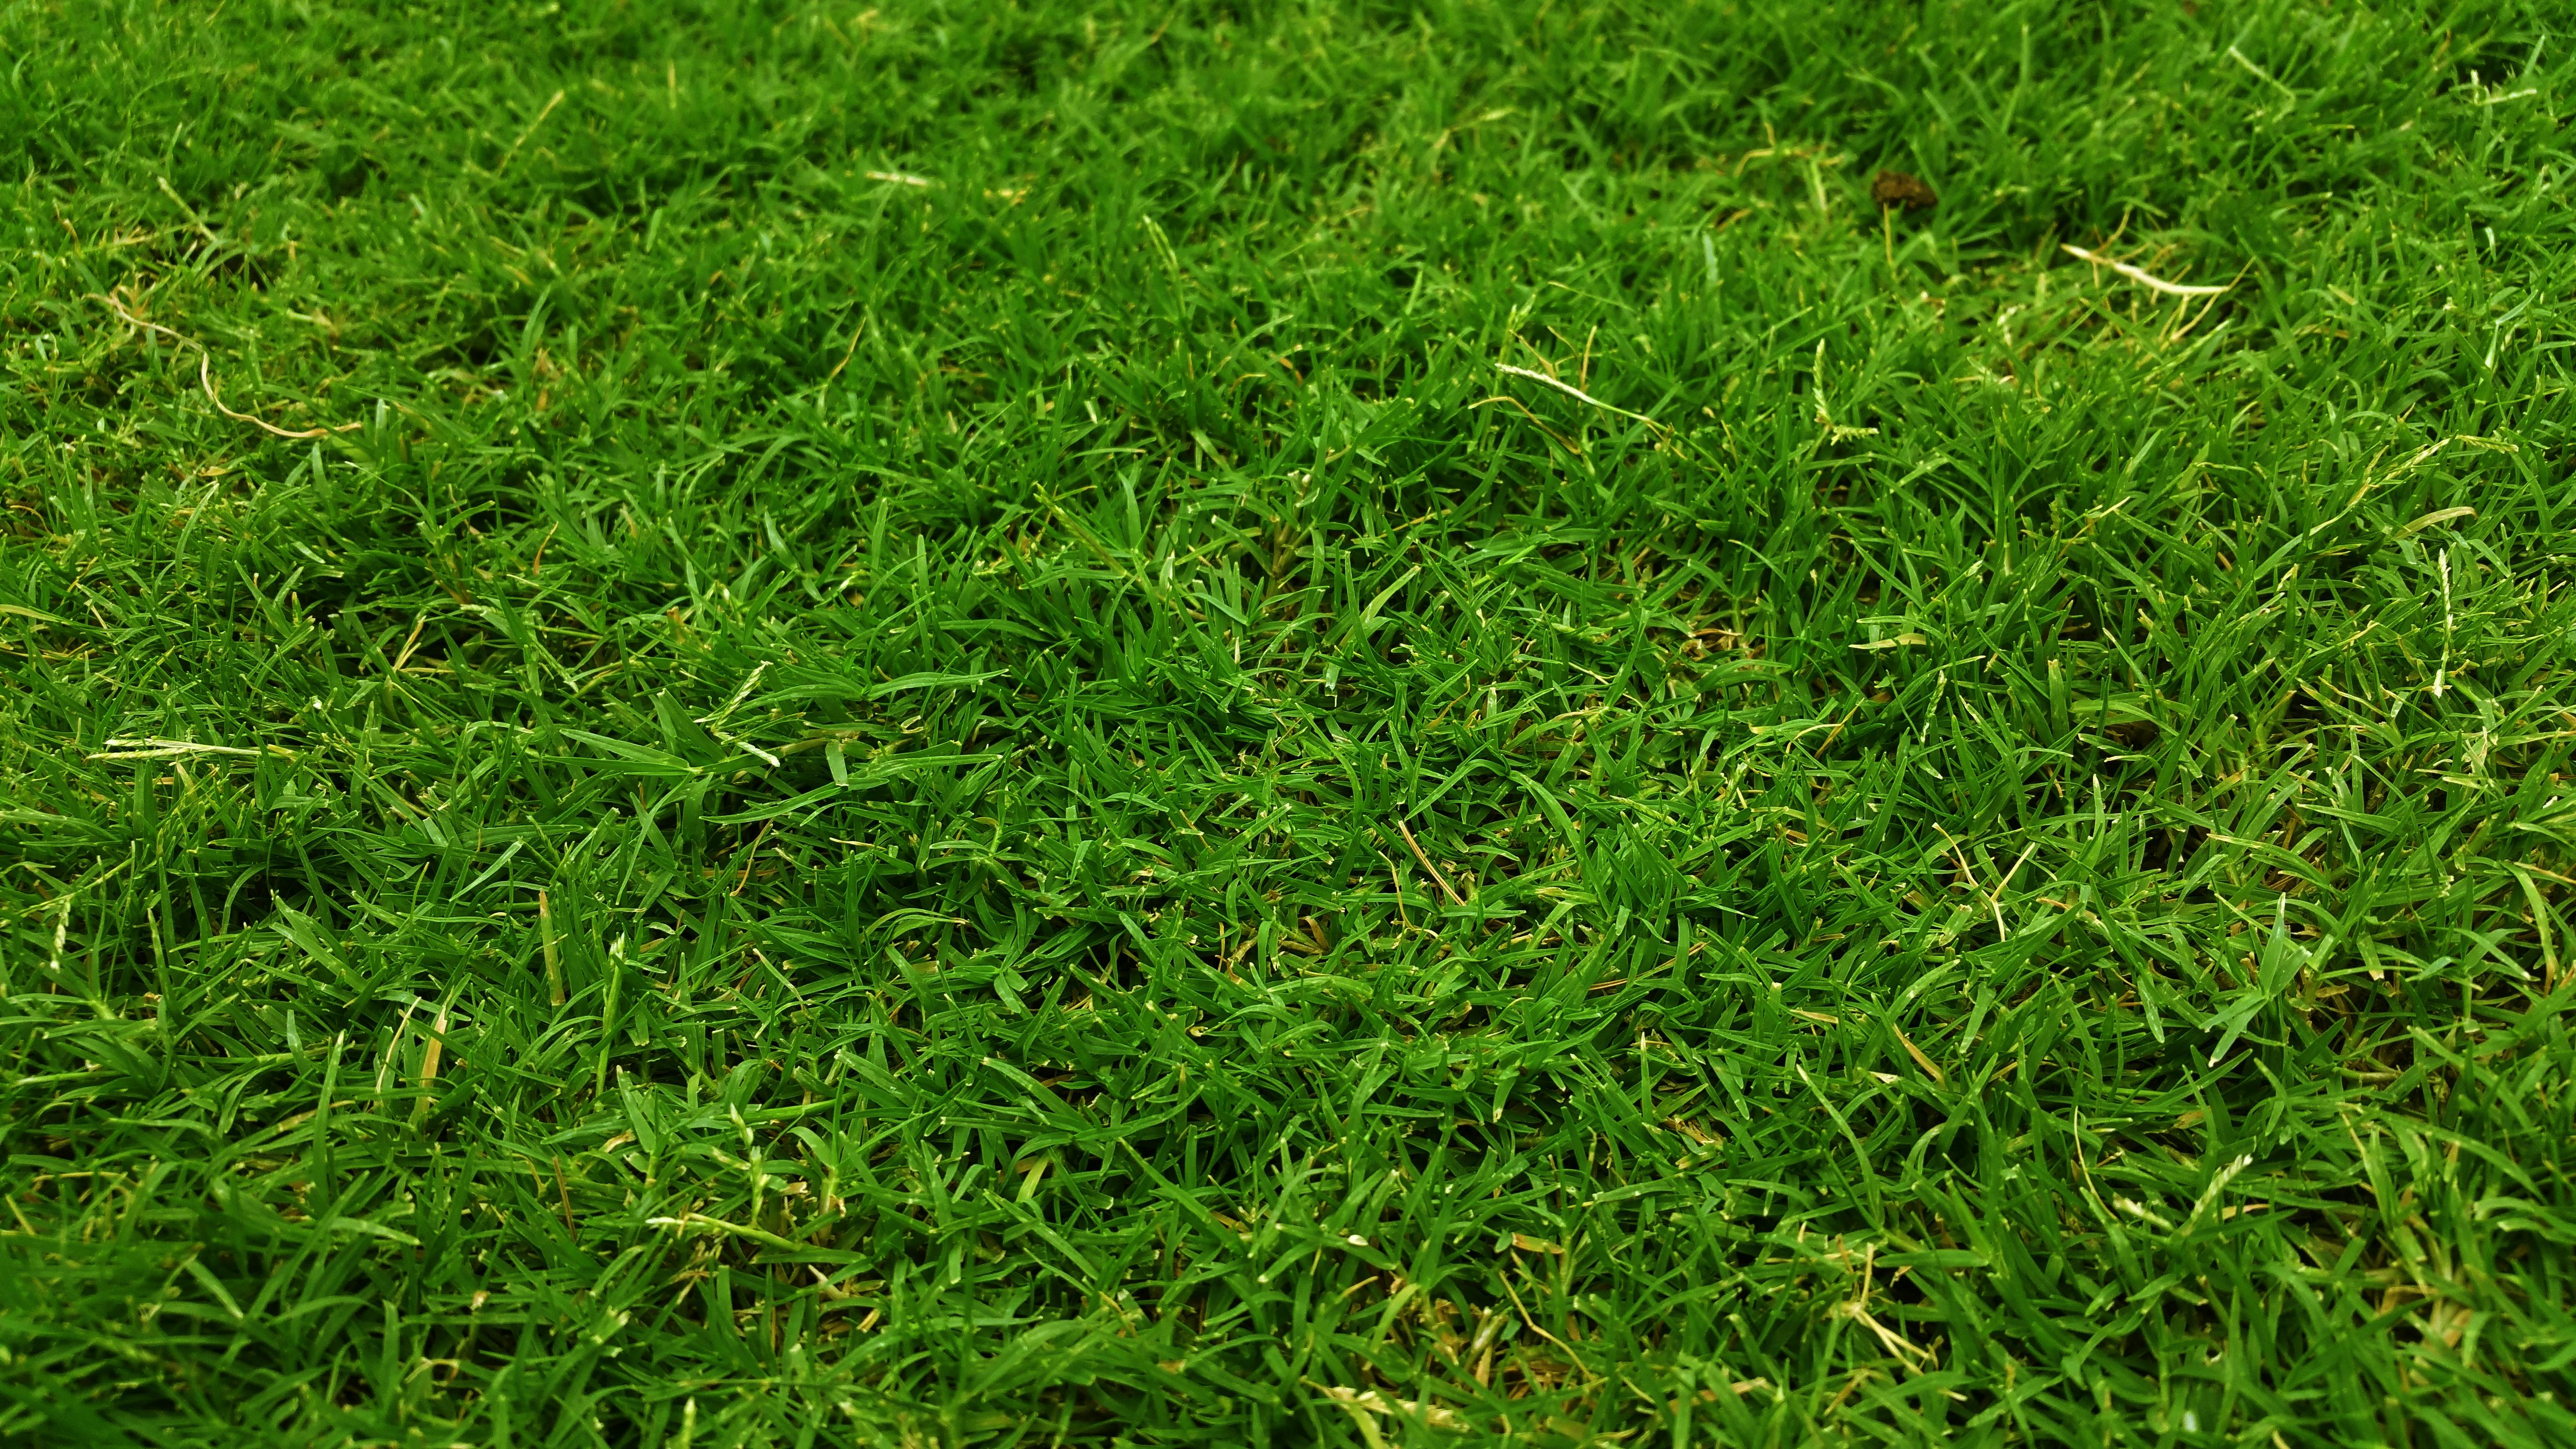 Grass Photos, Download The BEST Free Grass Stock Photos & HD Images